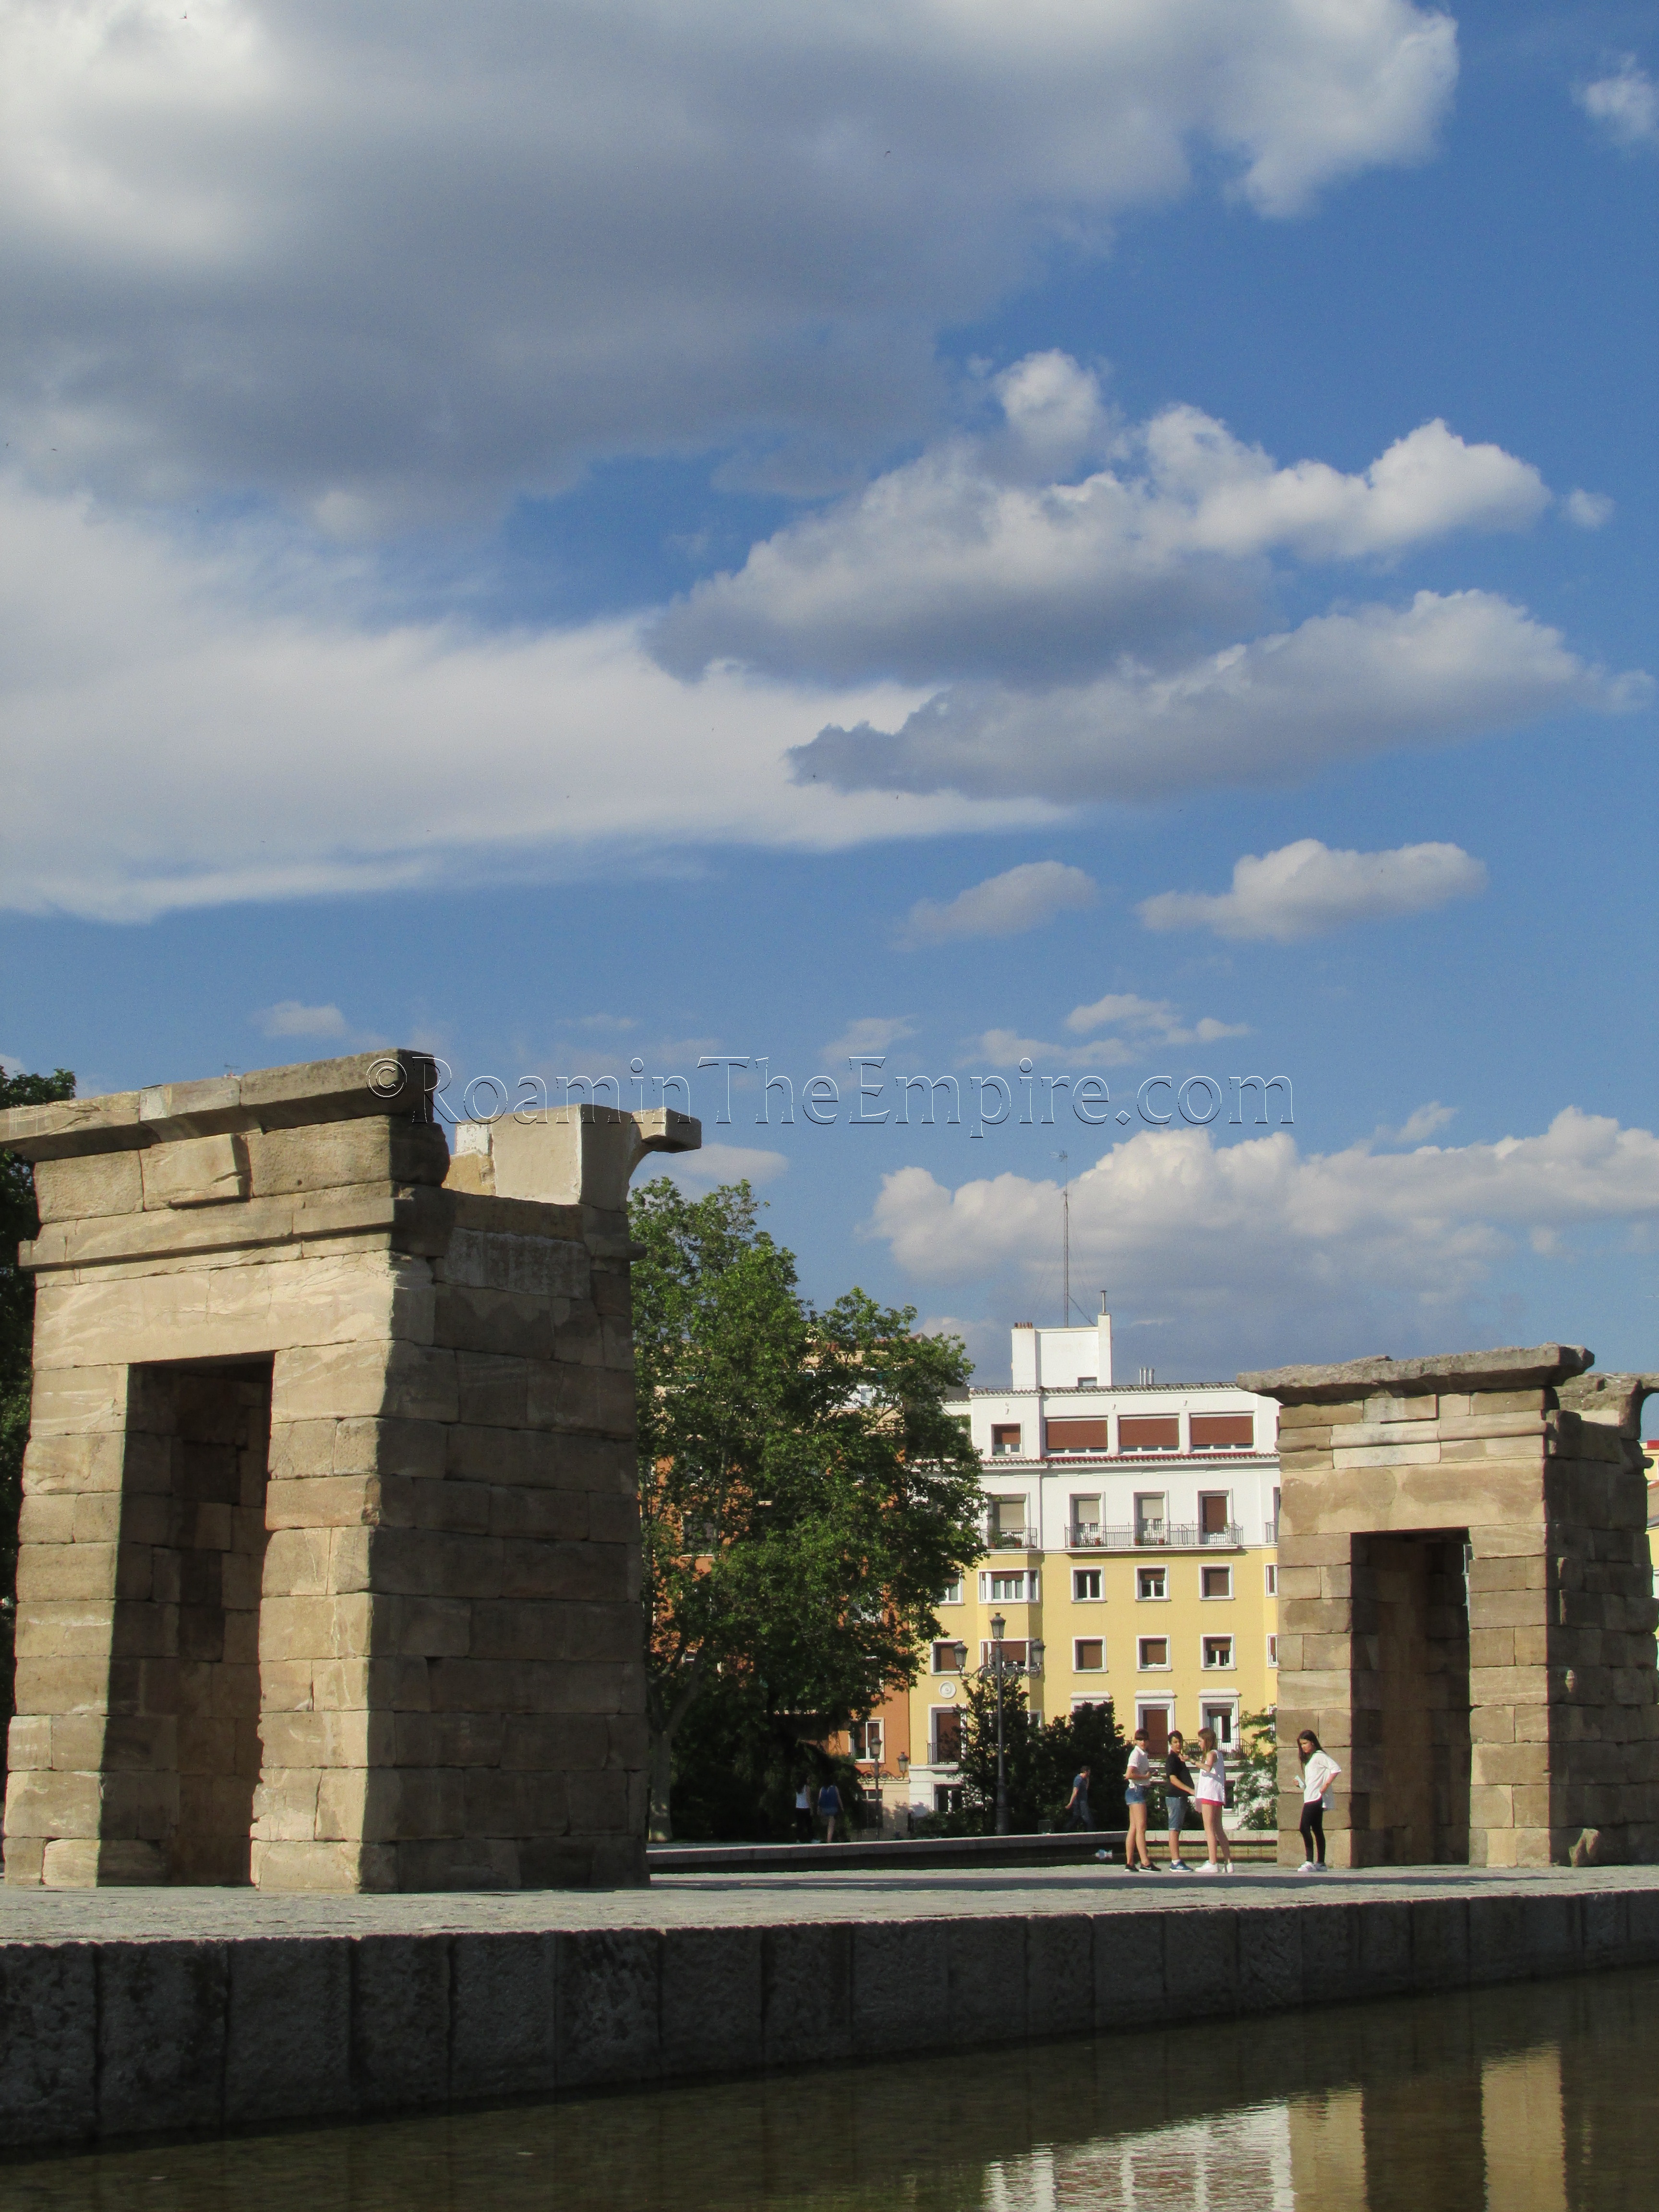 Portals of the Temple of Debod, the Roman construction on the right.